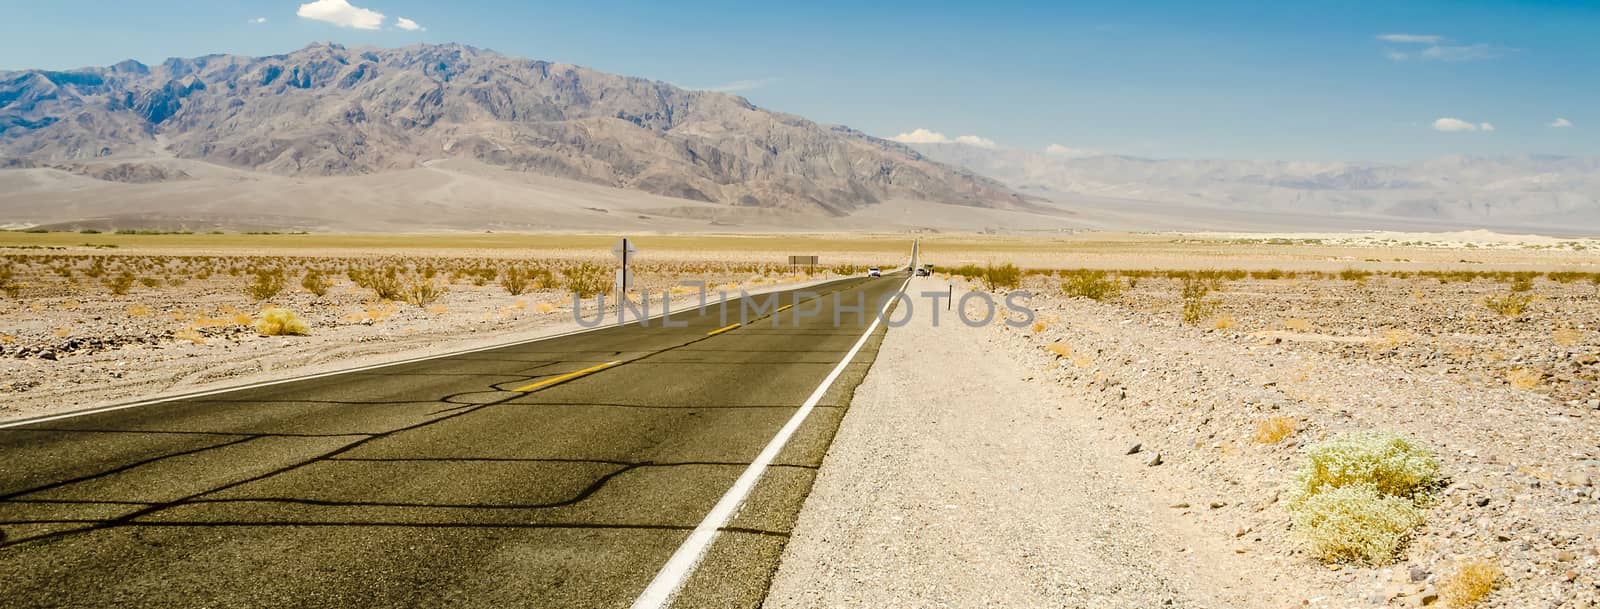 Hot desert road in Death Valley National Park, USA by marcorubino